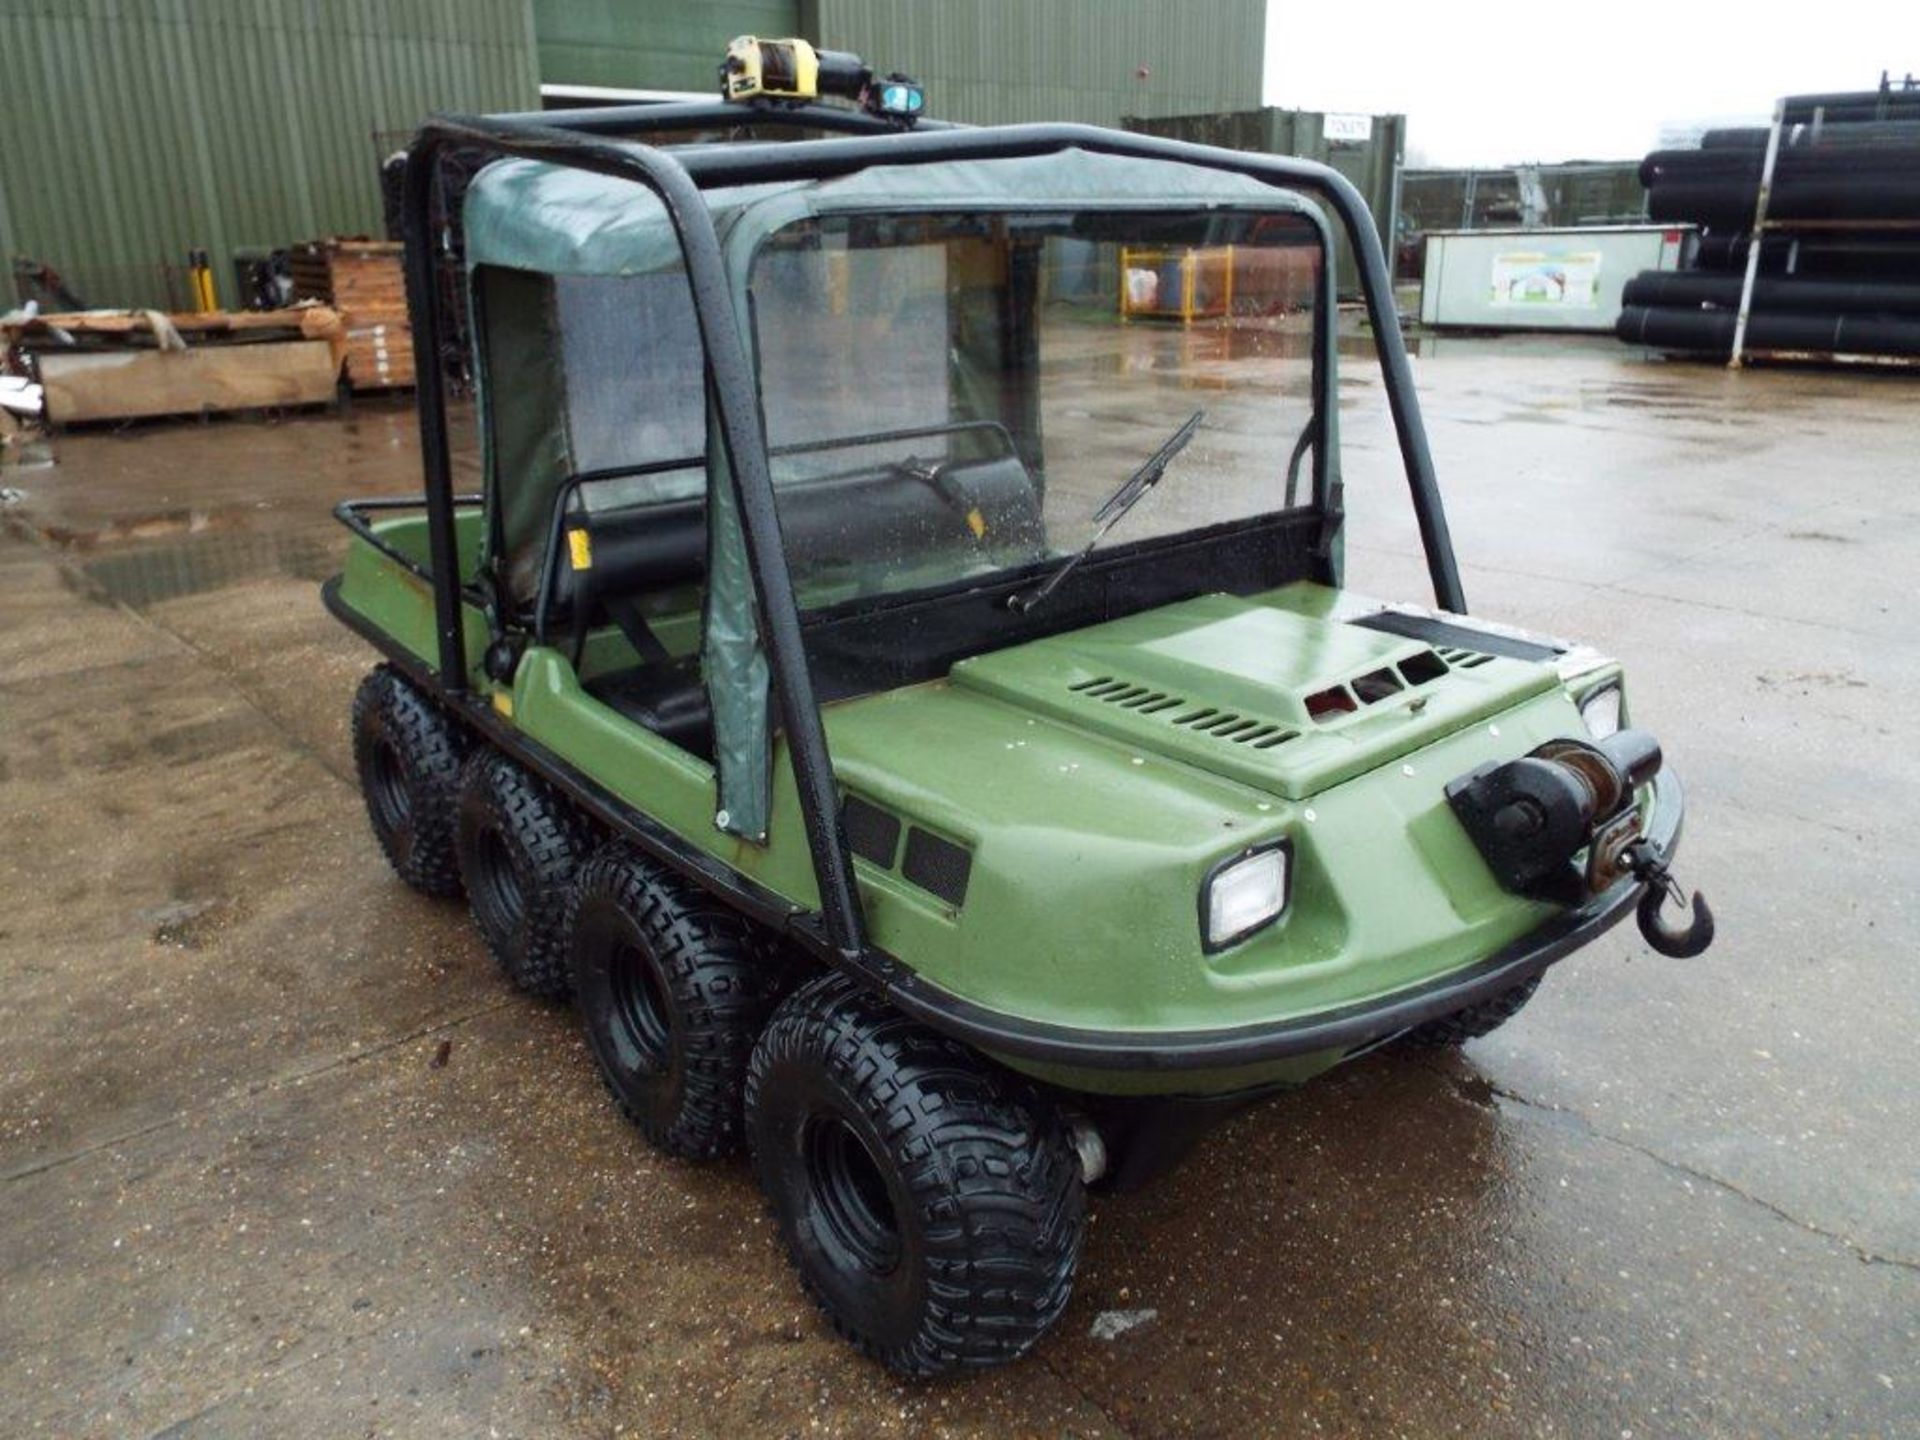 Argocat 8x8 V890-23 Amphibious ATV with Canopy and Front + Rear Winches